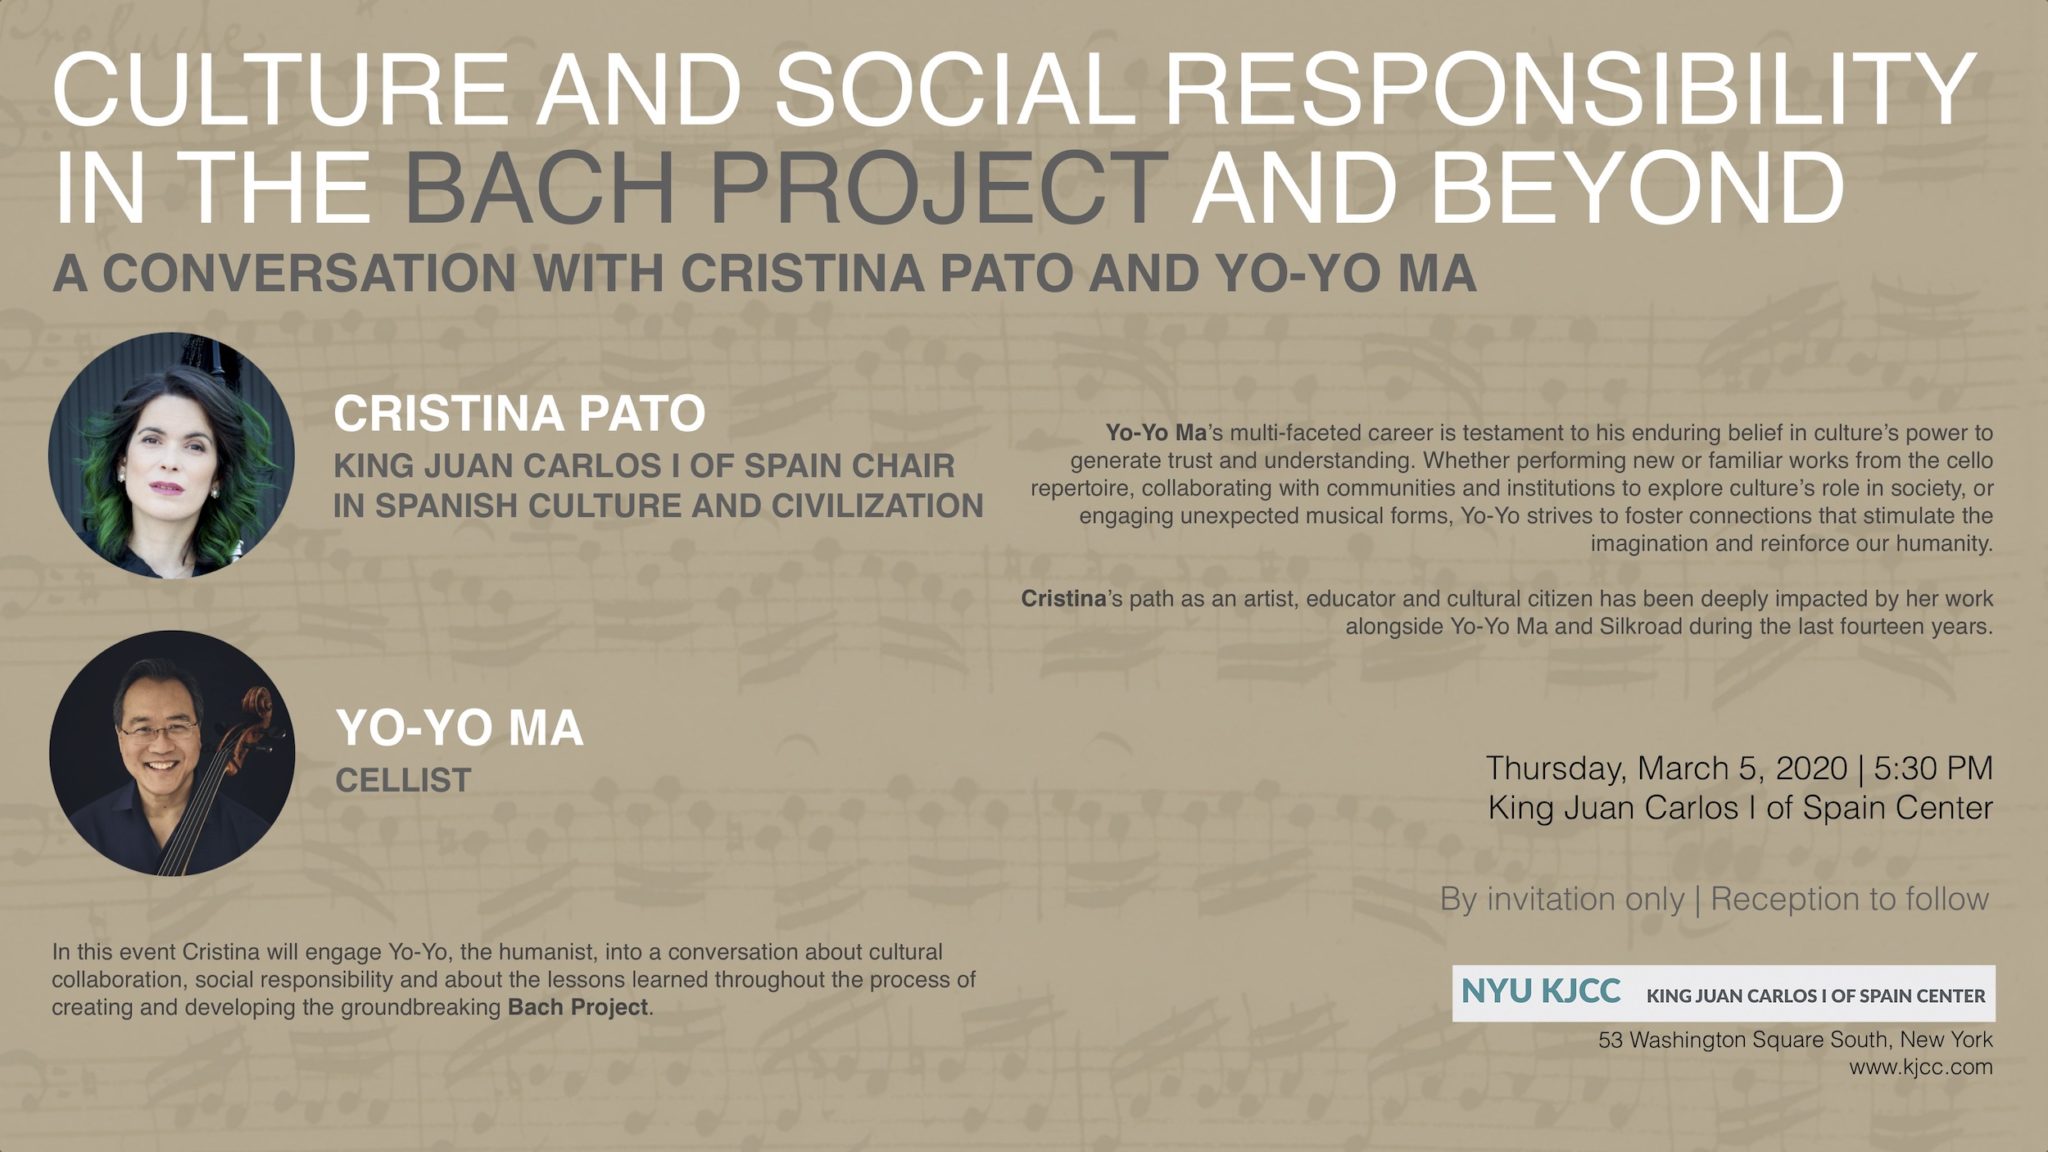 CRISTINA PATO | A CONVERSATION WITH YO-YO MA: Culture and Social Responsibility in the Bach Project and Beyond